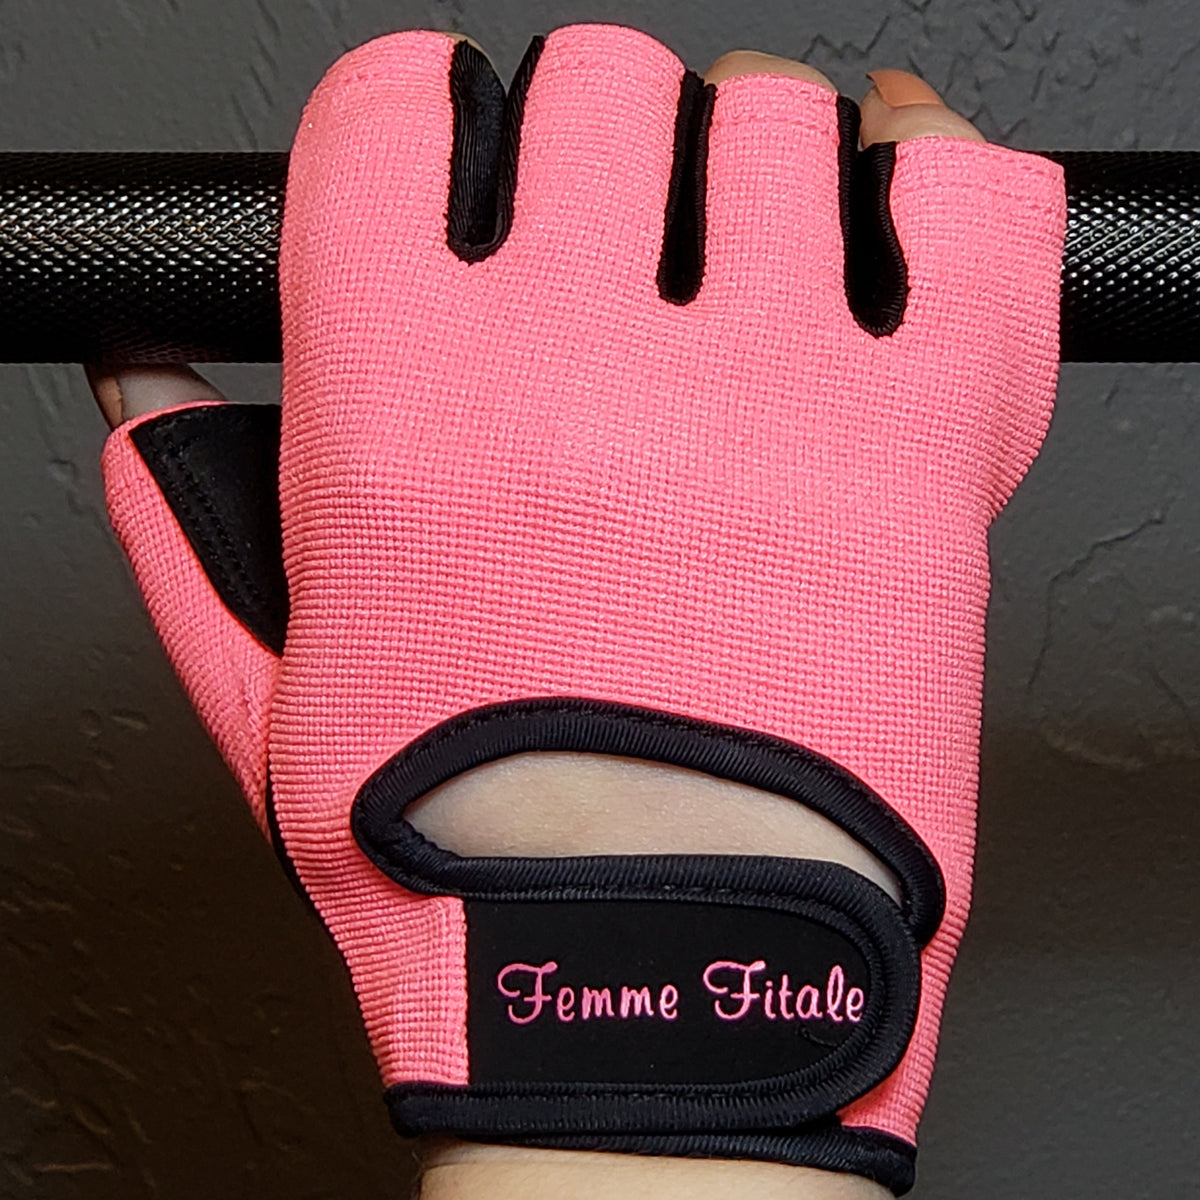 Femme Fitale Fitness Coral Womens Fitness Weight Gloves - No Crystals